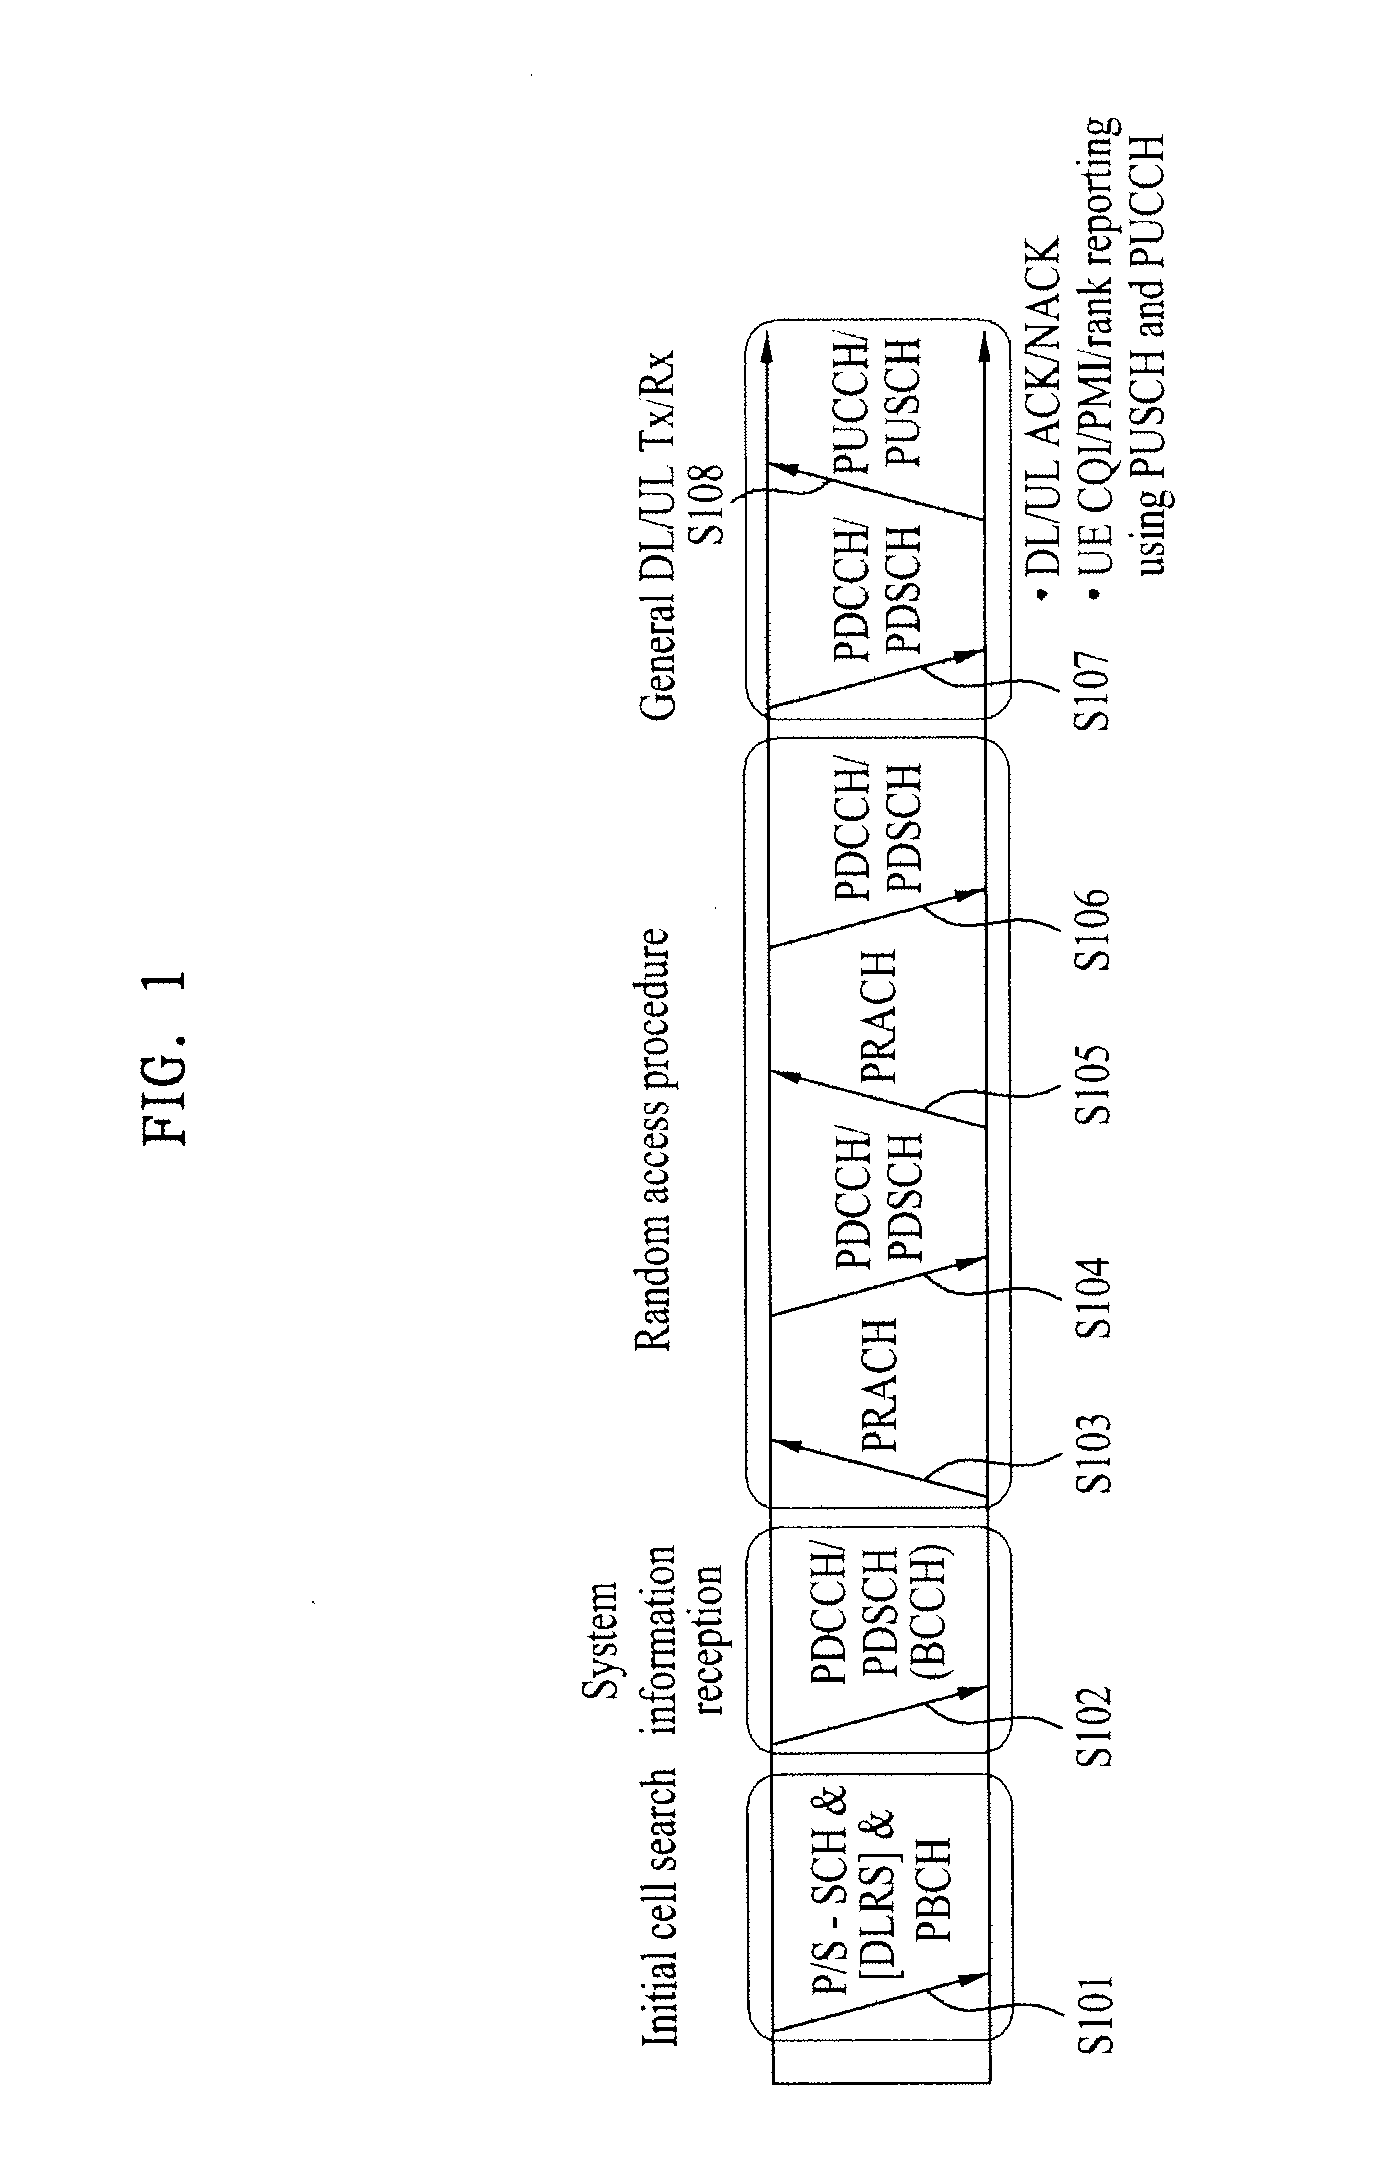 Method for allocating phich and generating reference signal in system using single-user MIMO based on multiple codewords when transmitting uplink